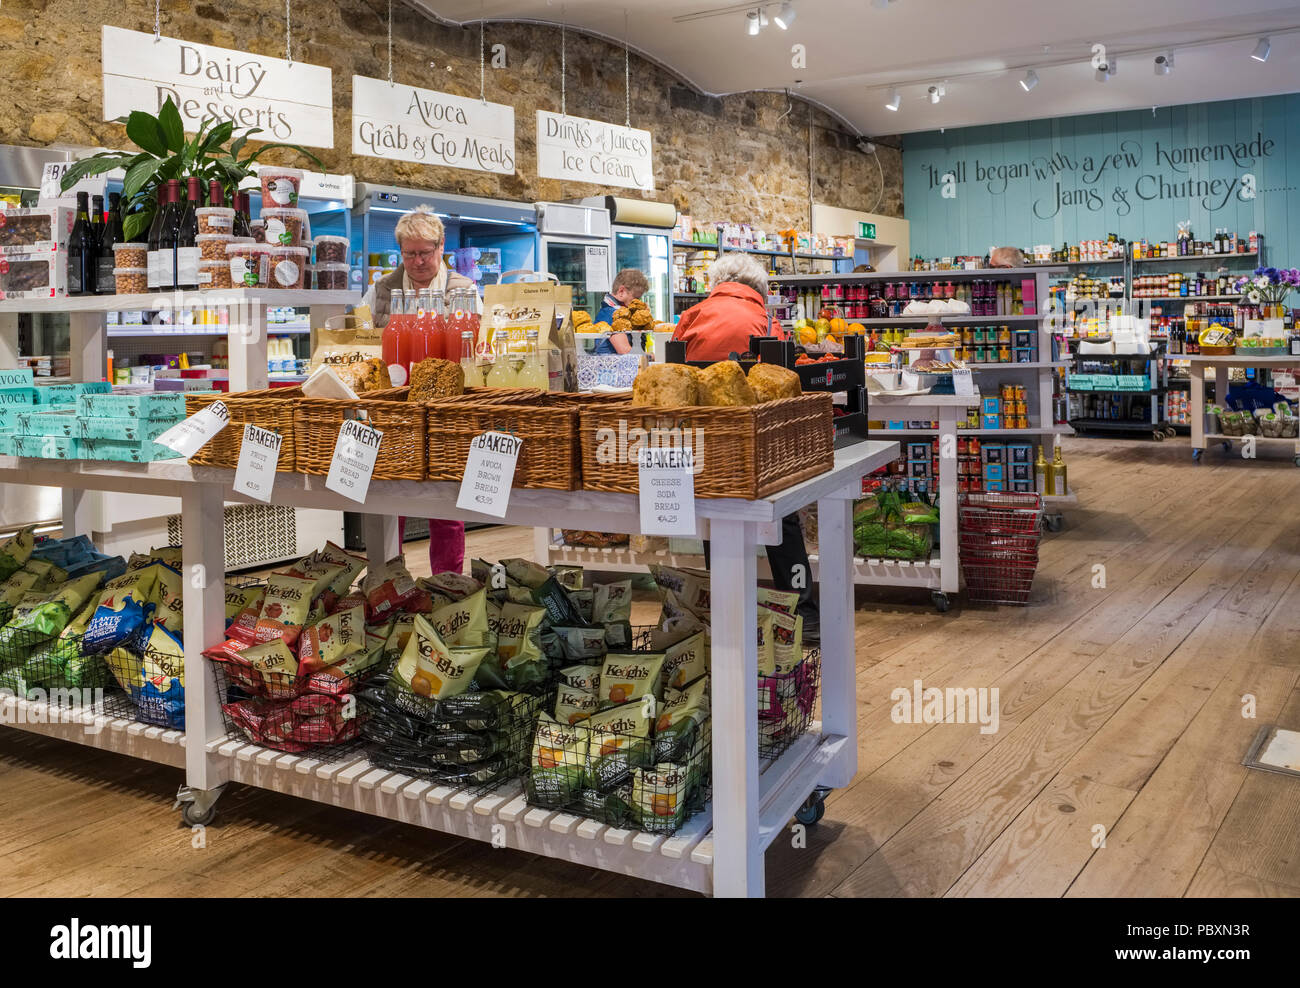 People shopping inside an Avoca store, an upmarket retail shop in the  Republic of Ireland, Europe Stock Photo - Alamy